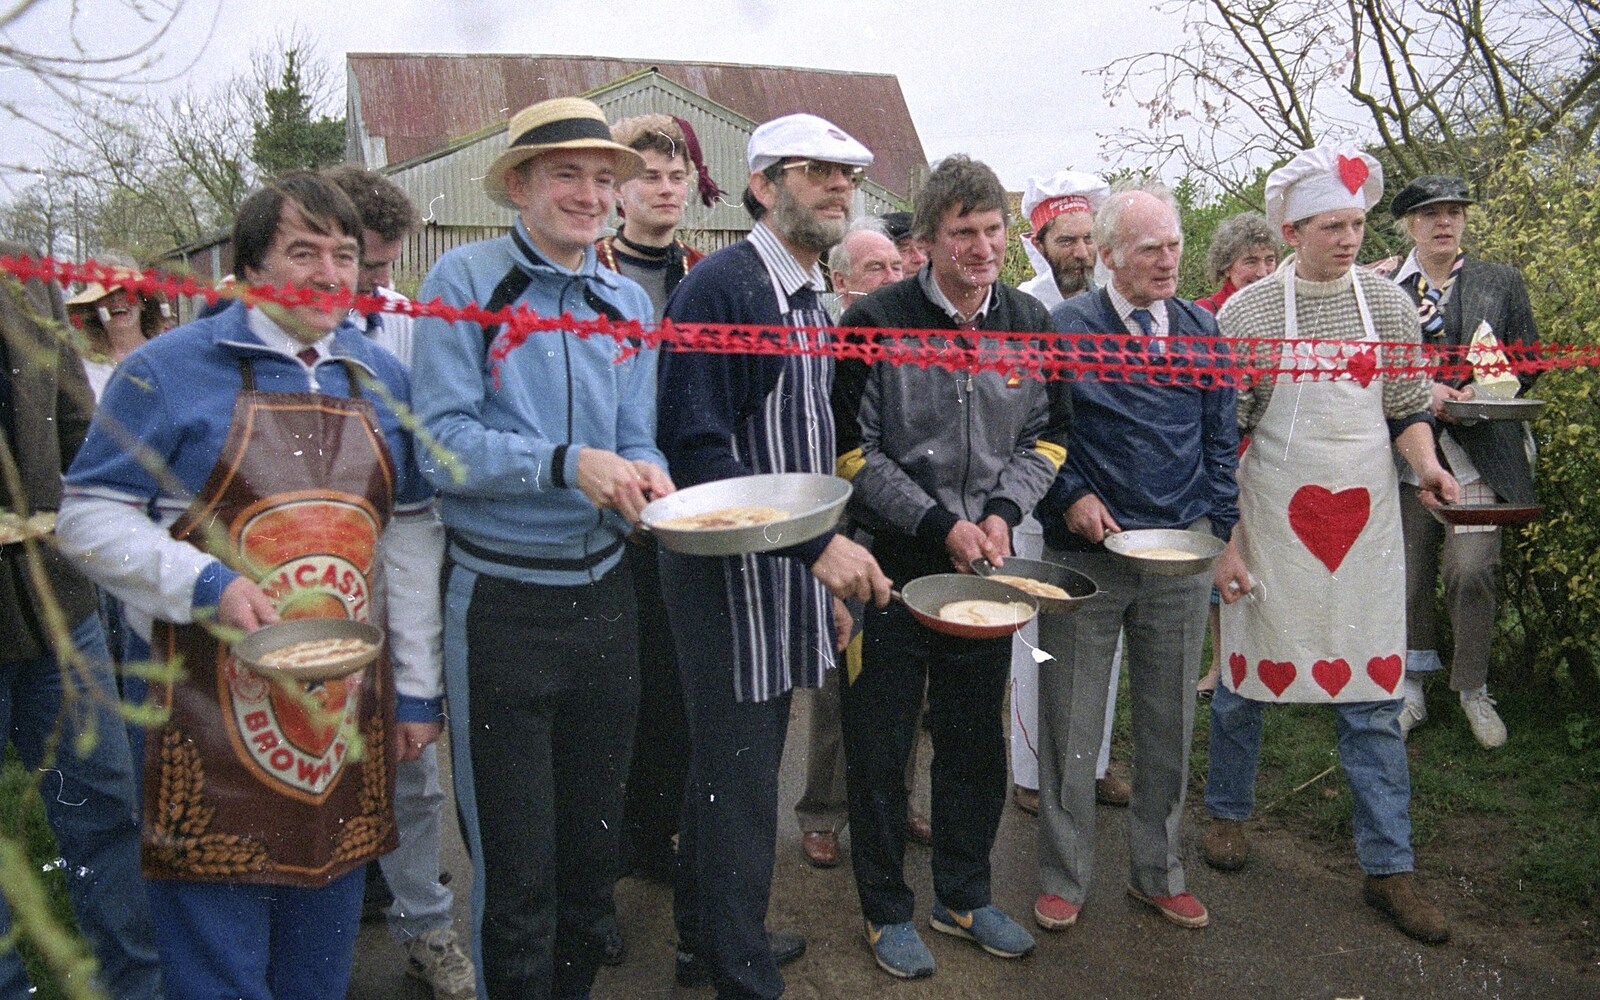 Nosher in dodgy trackie and a hat from Pancake Day in Starston, Norfolk - 27th February 1990